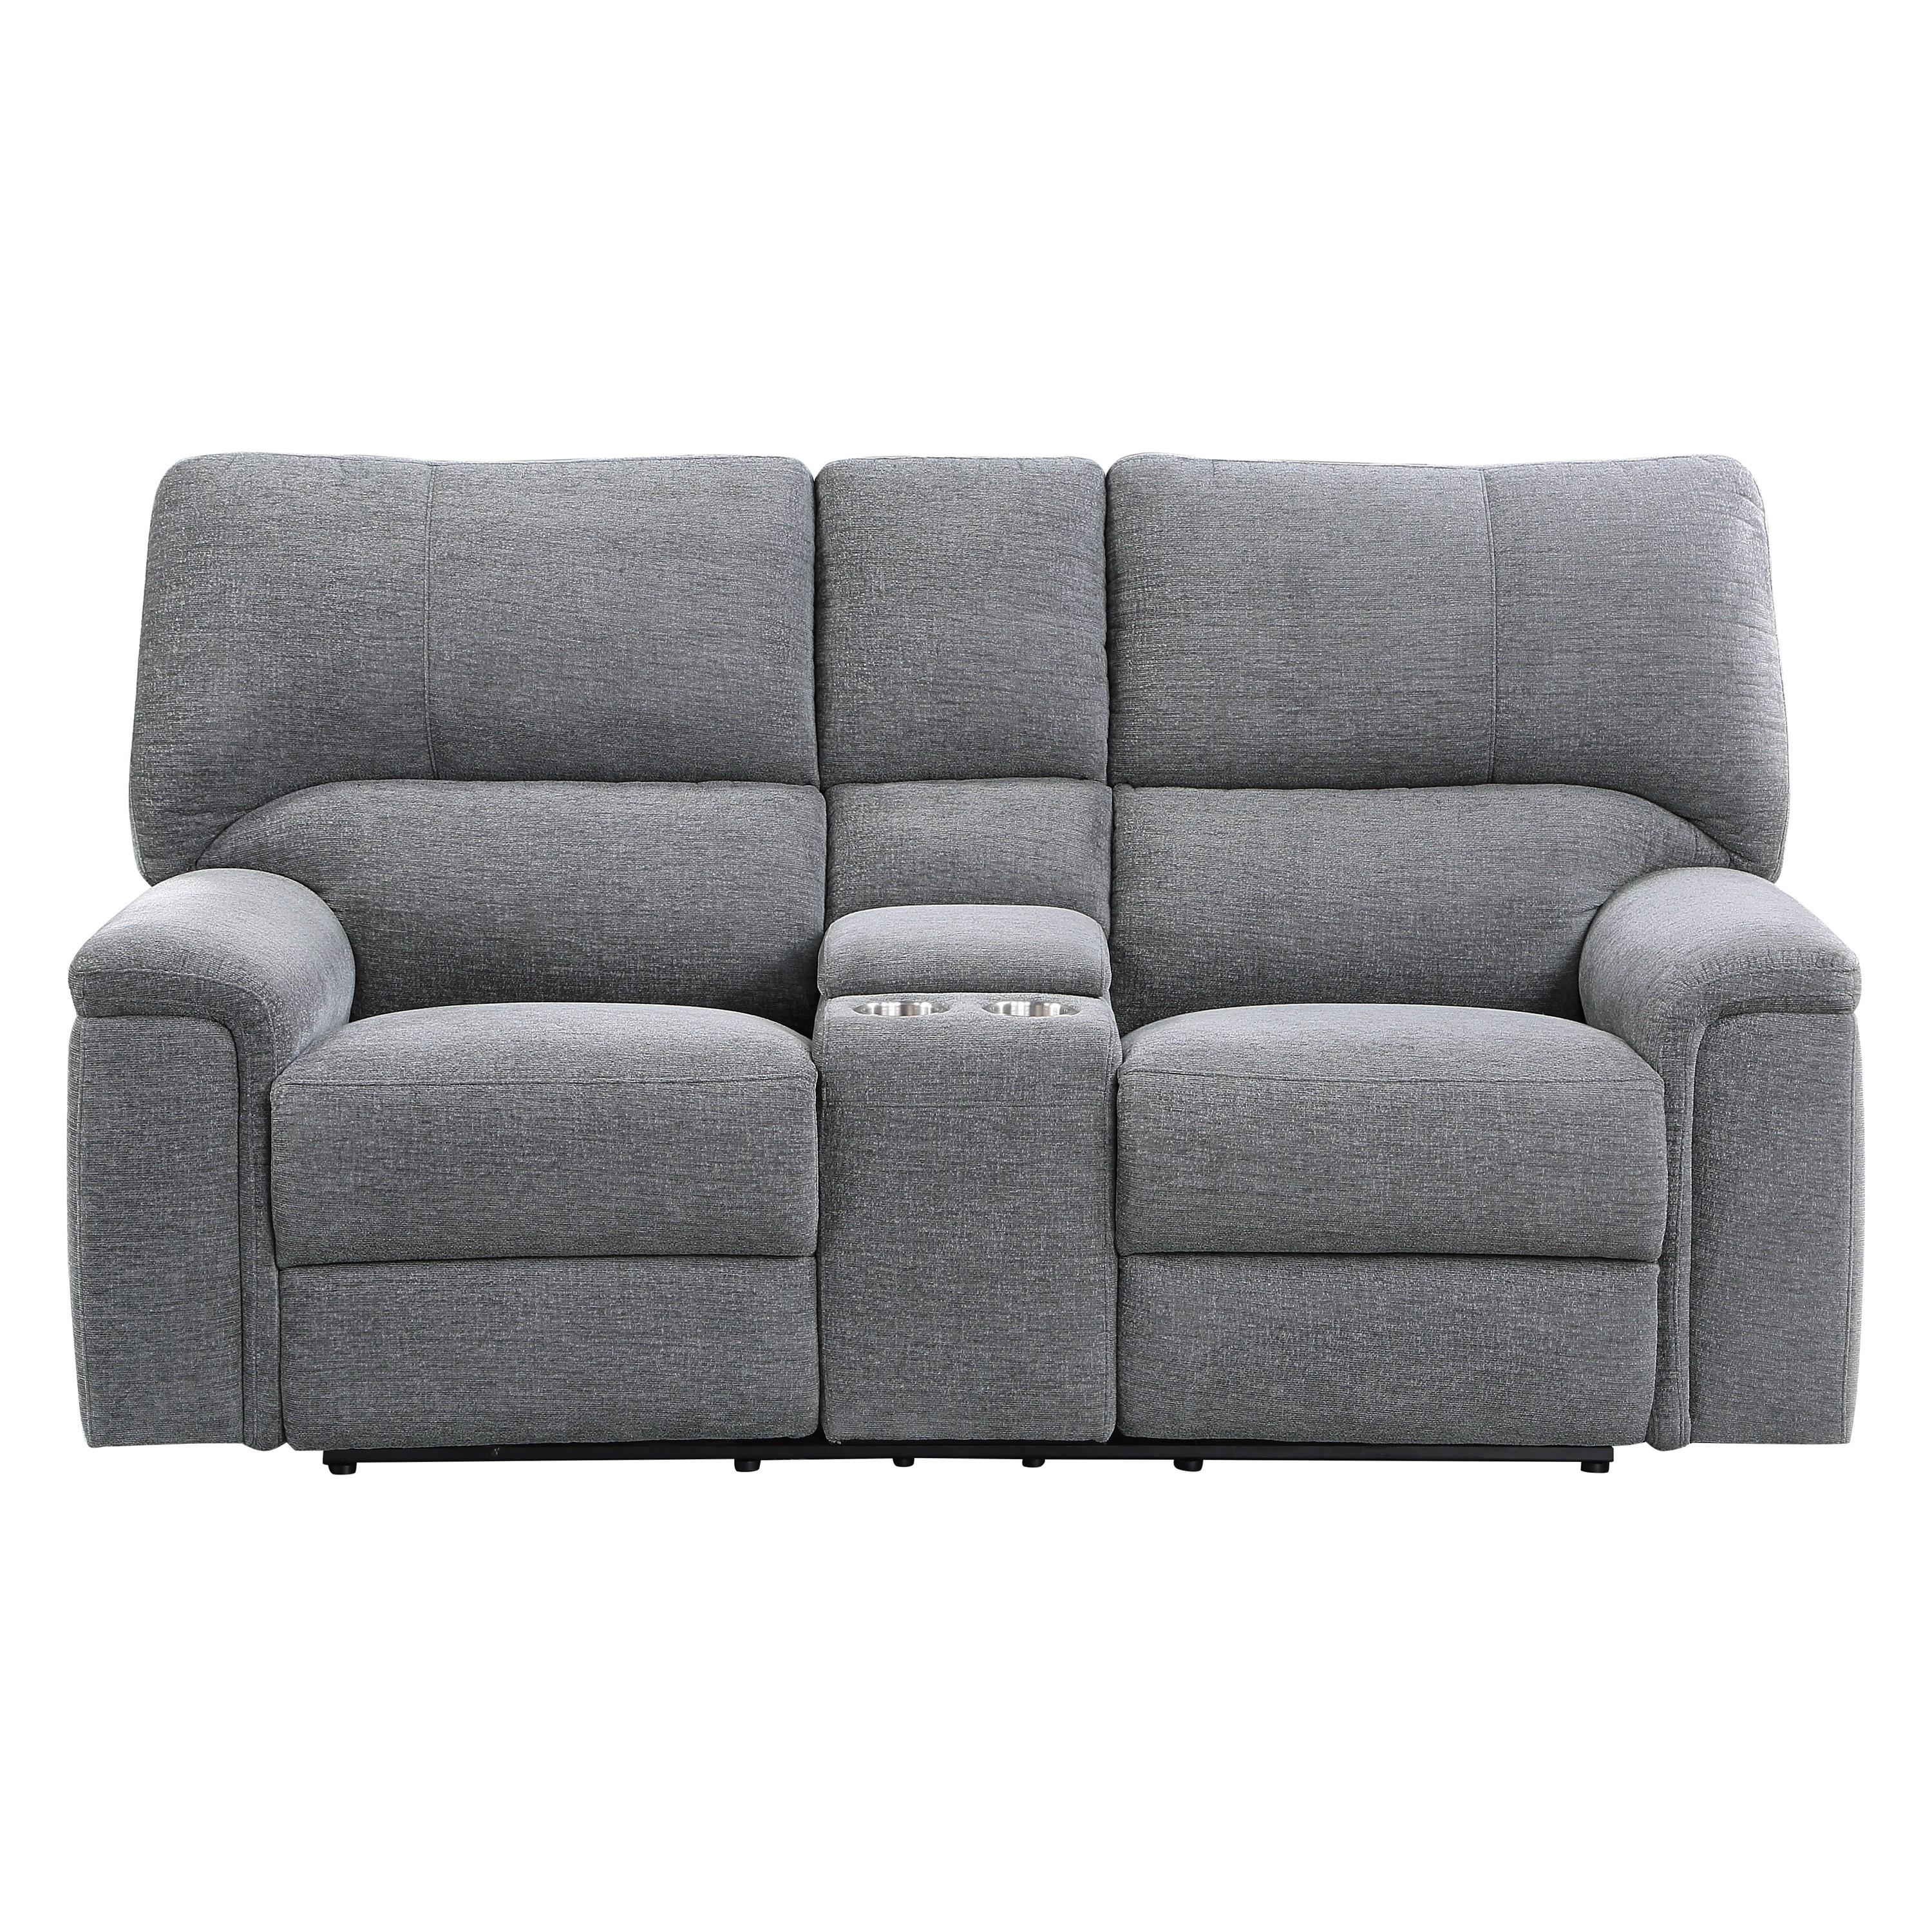 Transitional Reclining Loveseat 9413CC-2 Dickinson 9413CC-2 in Charcoal Chenille